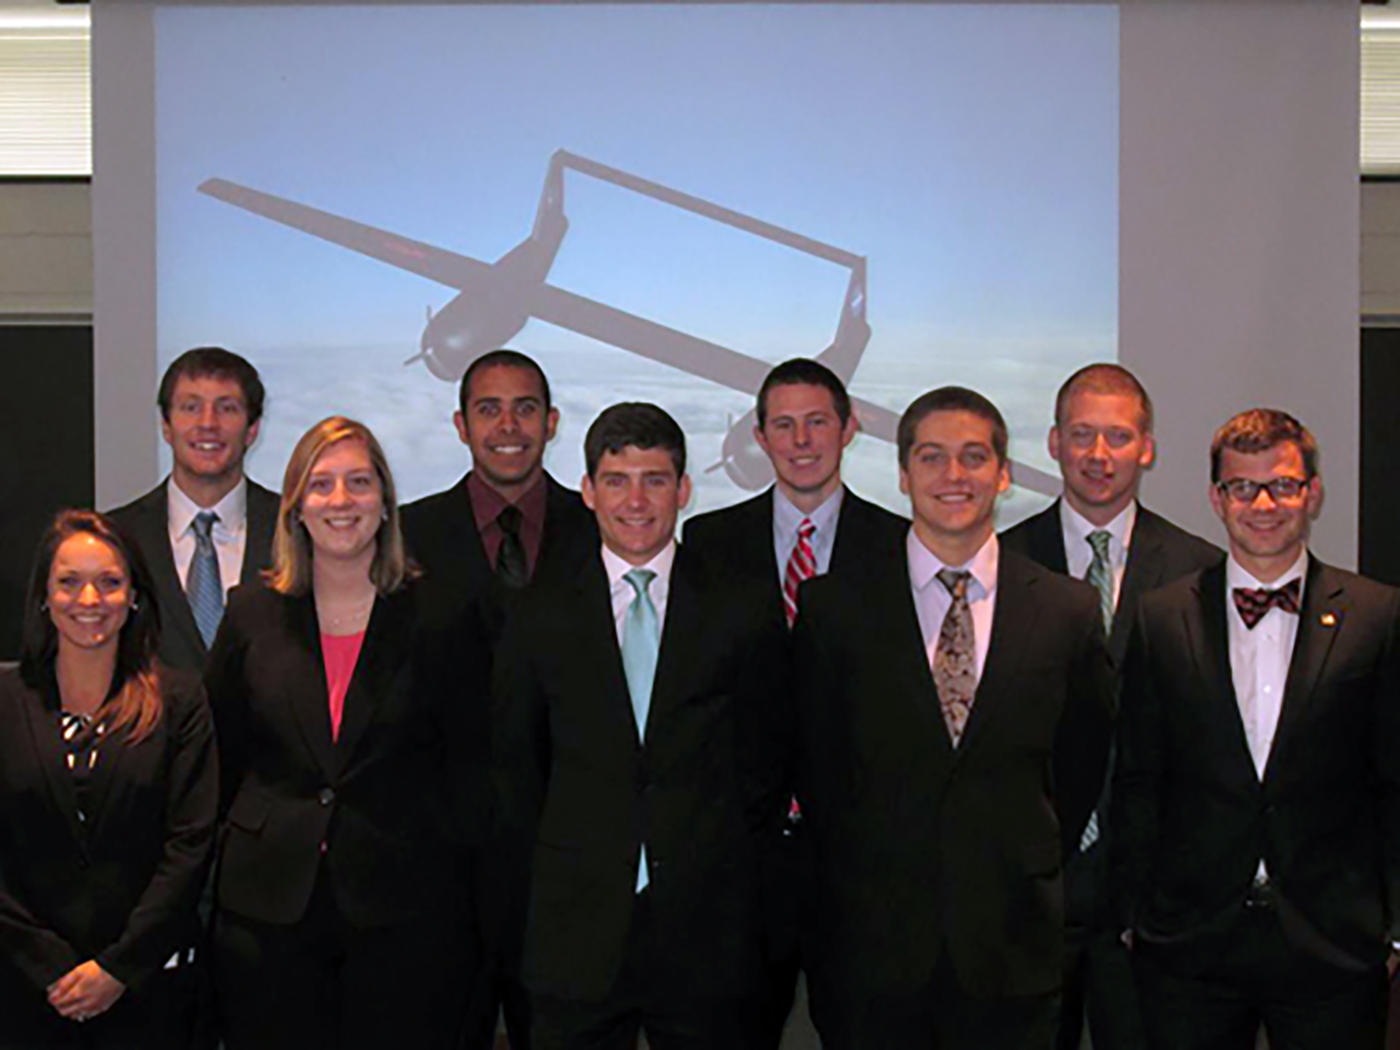 Group photo of 1st place winners of the 2014 design challenge from VA Tech.